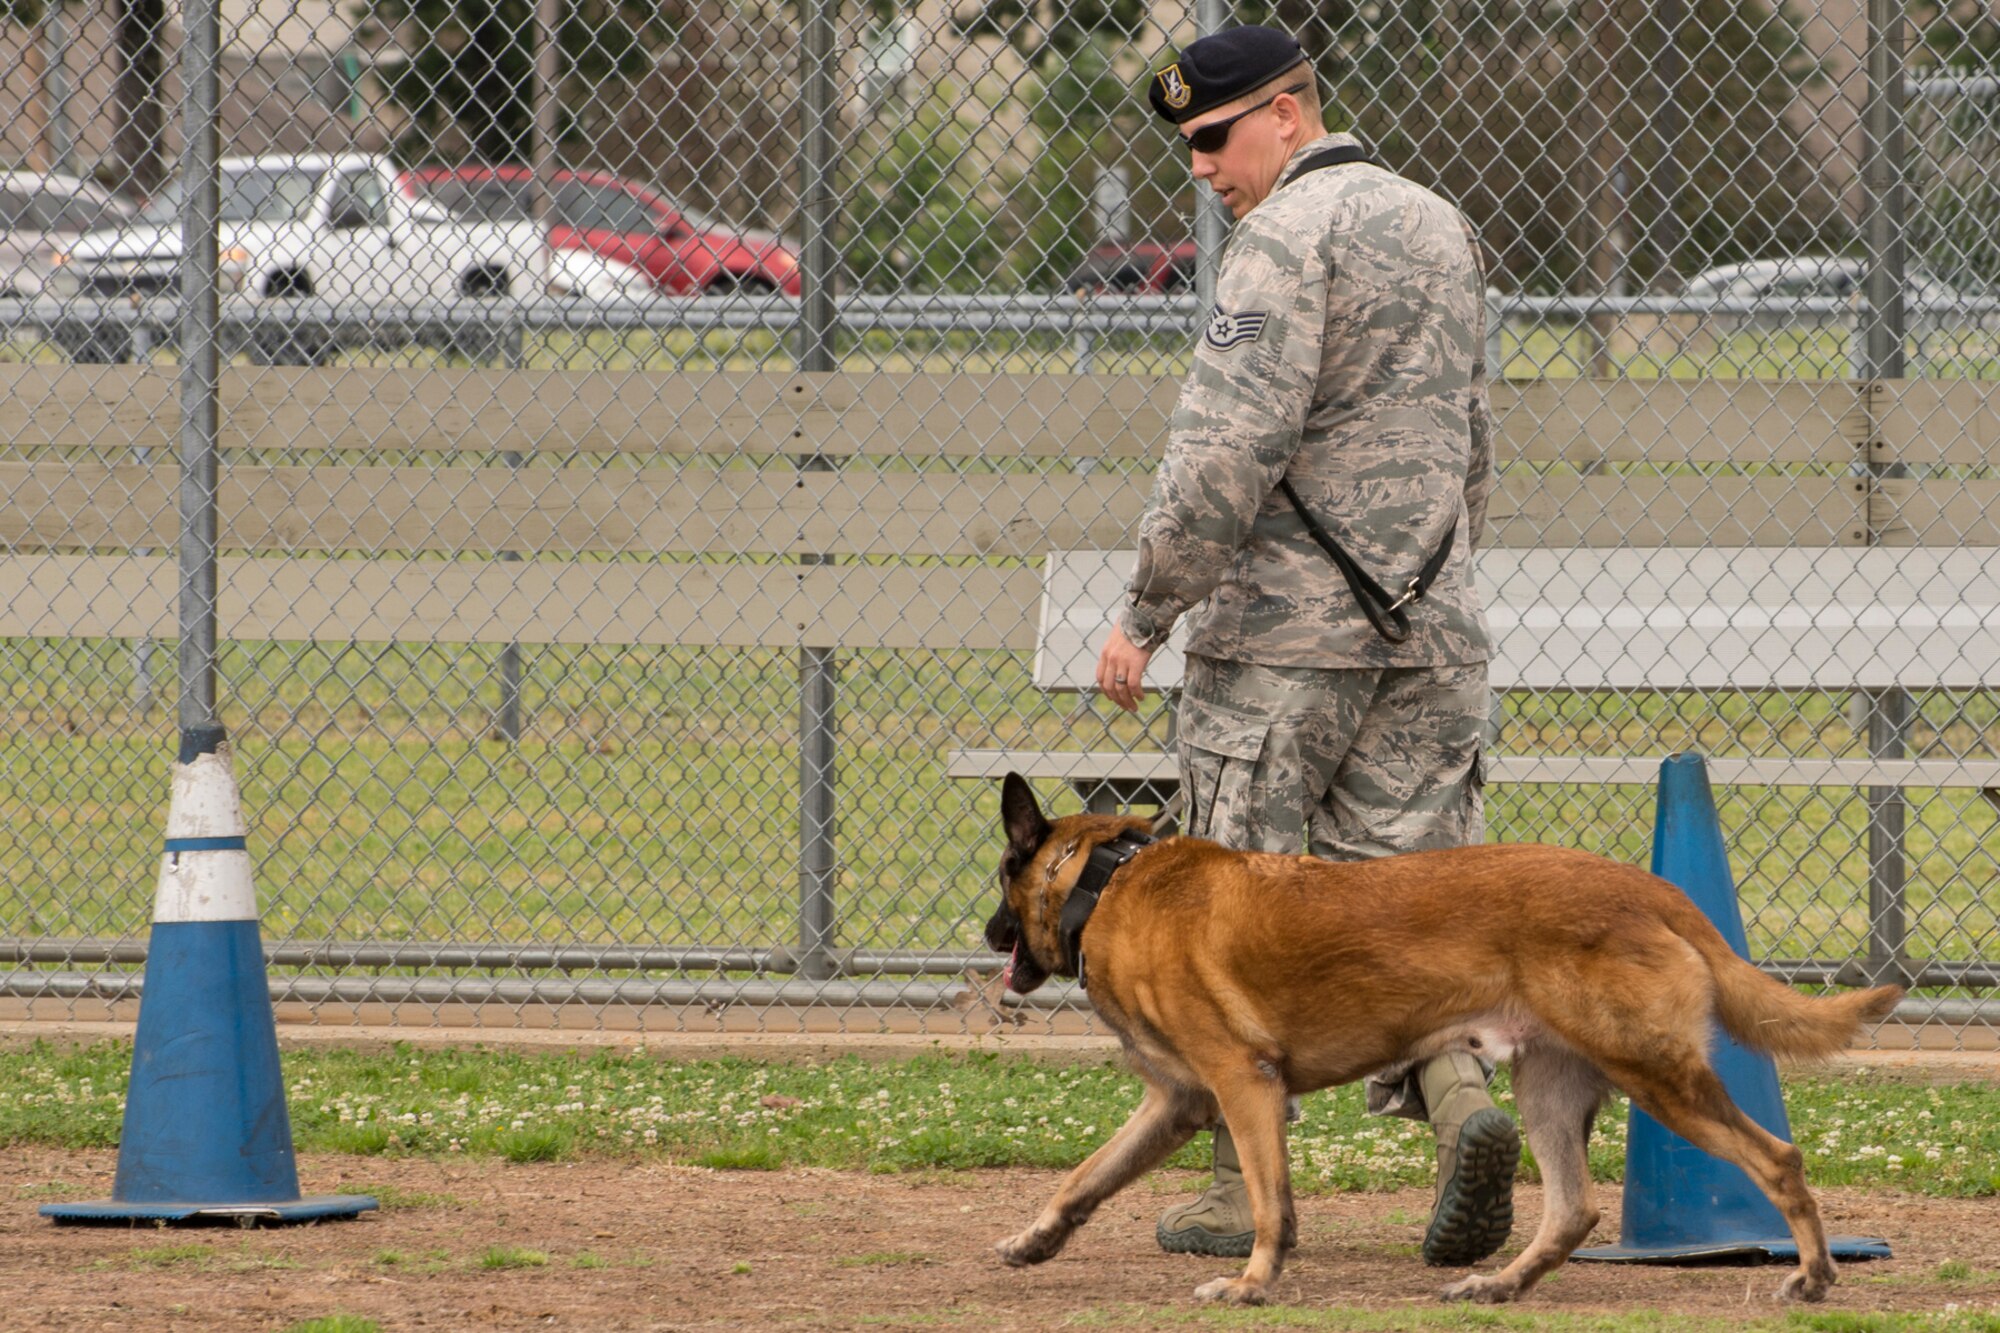 U.S. Air Force Staff Sgt. Caleb McDaniel, a 19th Security Forces Squadron military working dog handler, and his partner Britt, maneuver in and out of cones to show how they get around barriers during the obedience portion of the “Military Working Dog (MWD) Competition" at Little Rock Air Force Base, Ark., May 17, 2017. The competition, which included numerous law enforcement agencies, was held in honor of National Police Week. (U.S. Air Force photo by Master Sgt. Jeff Walston/Released)